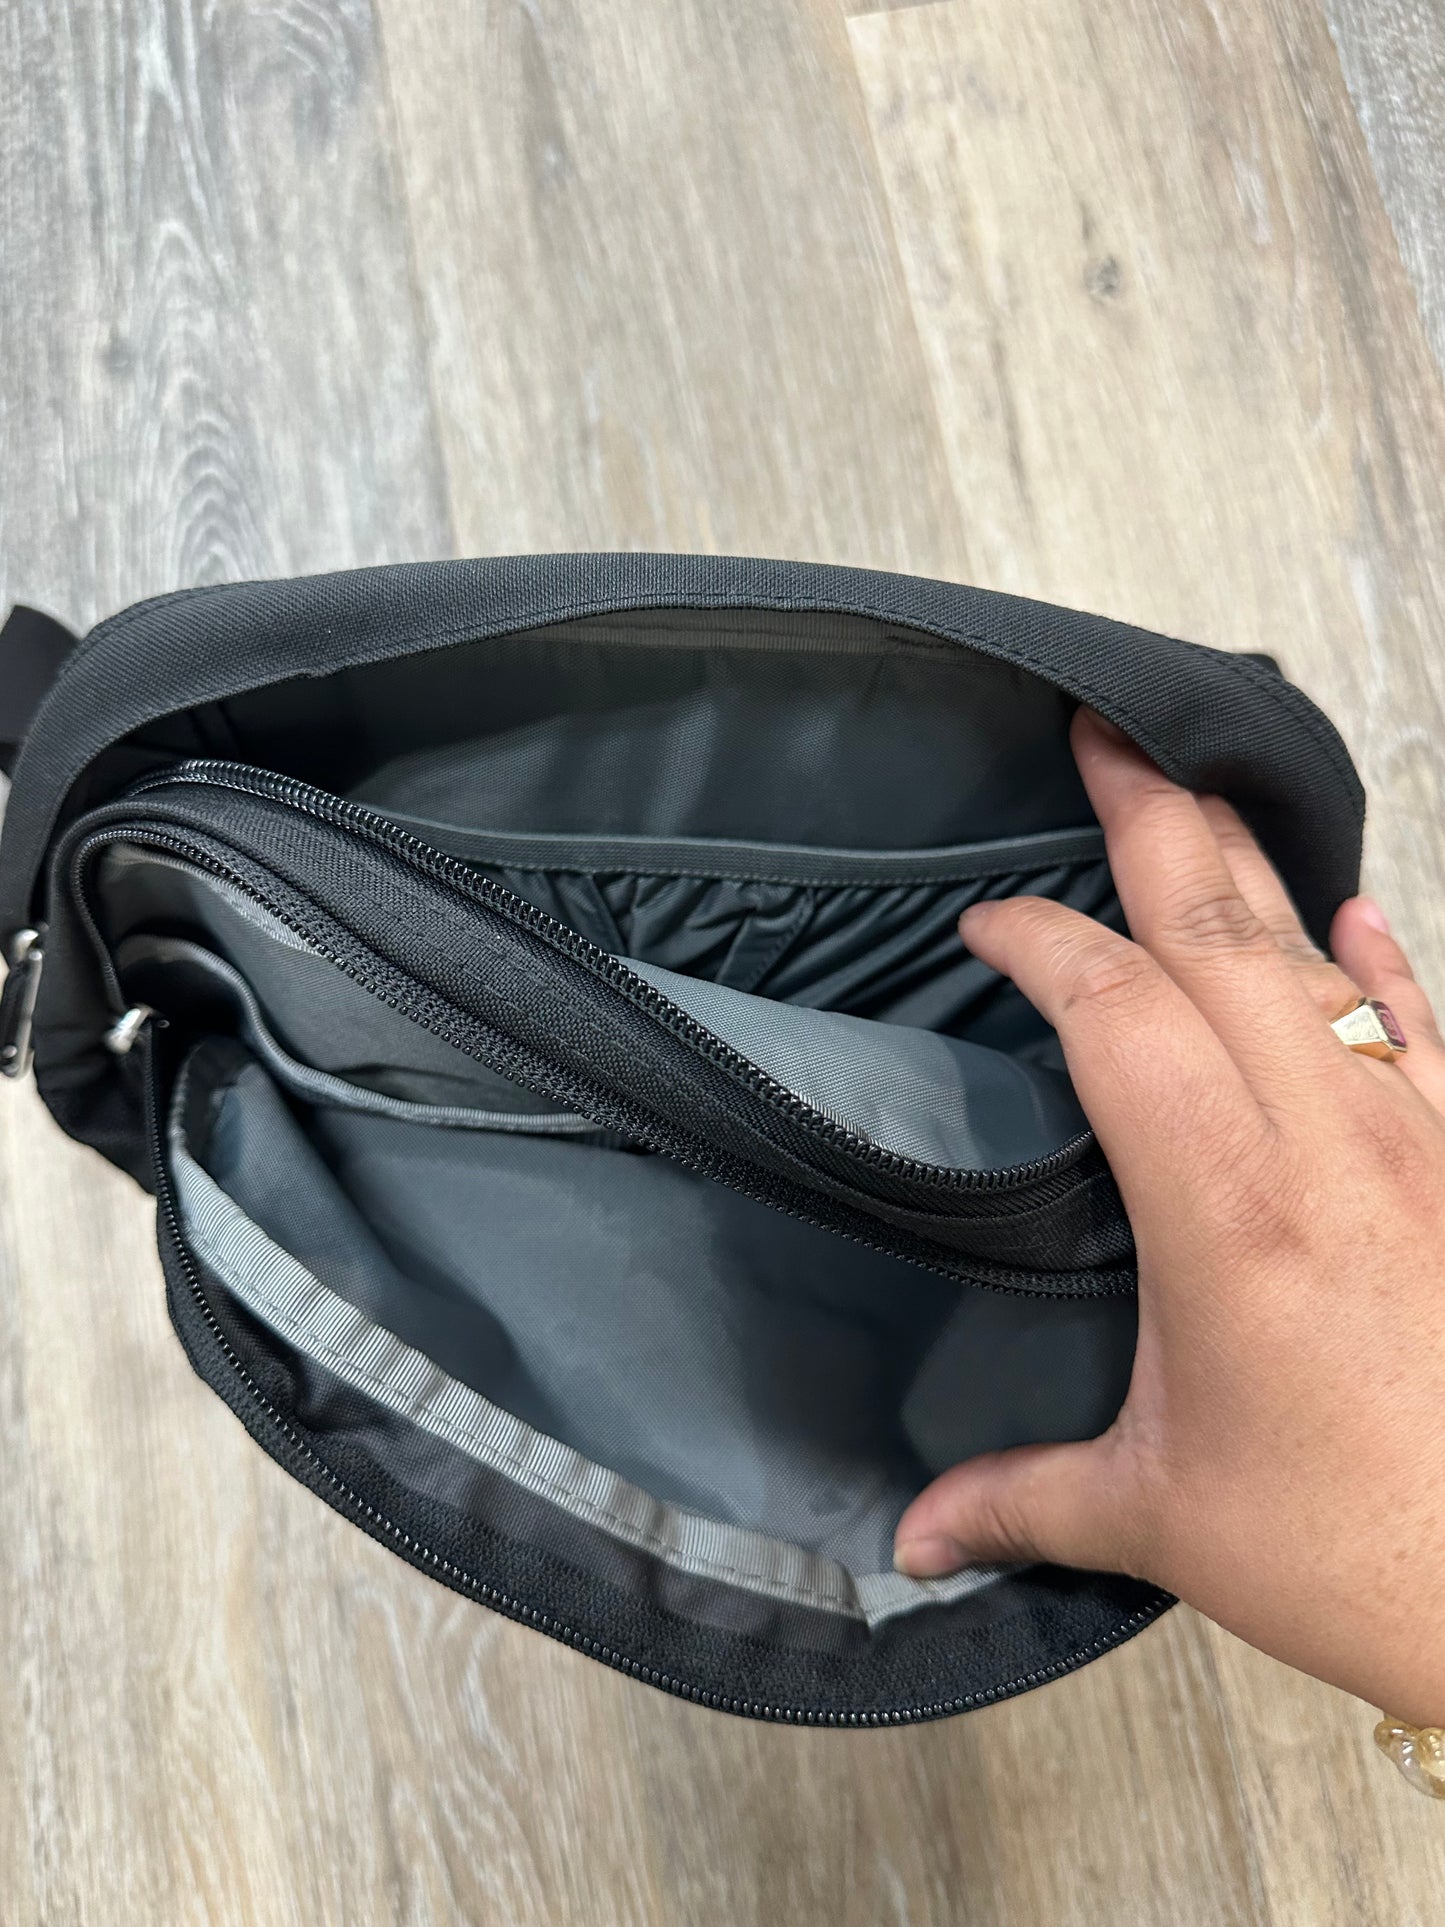 Belt Bag By The North Face  Size: Medium